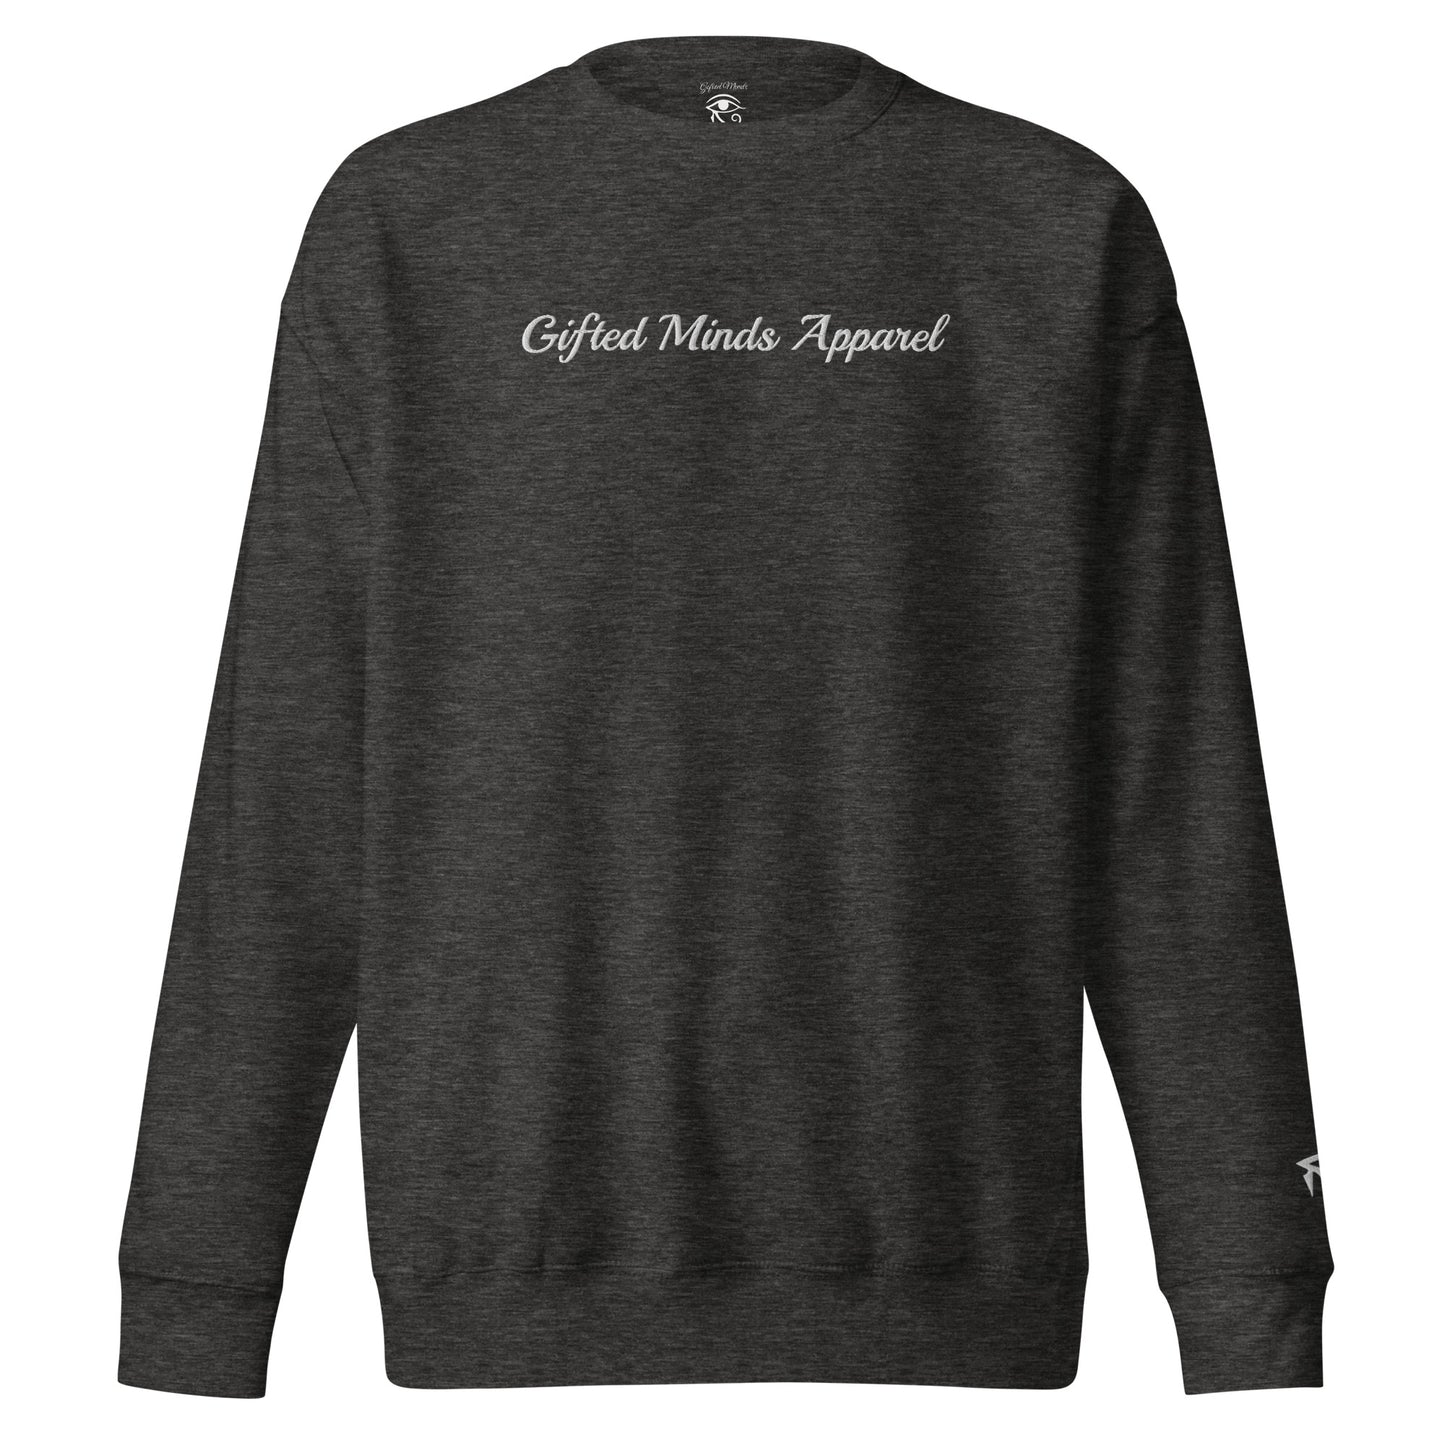 Gifted Minds Embroidered Script Sweatshirt - GFTD MNDS